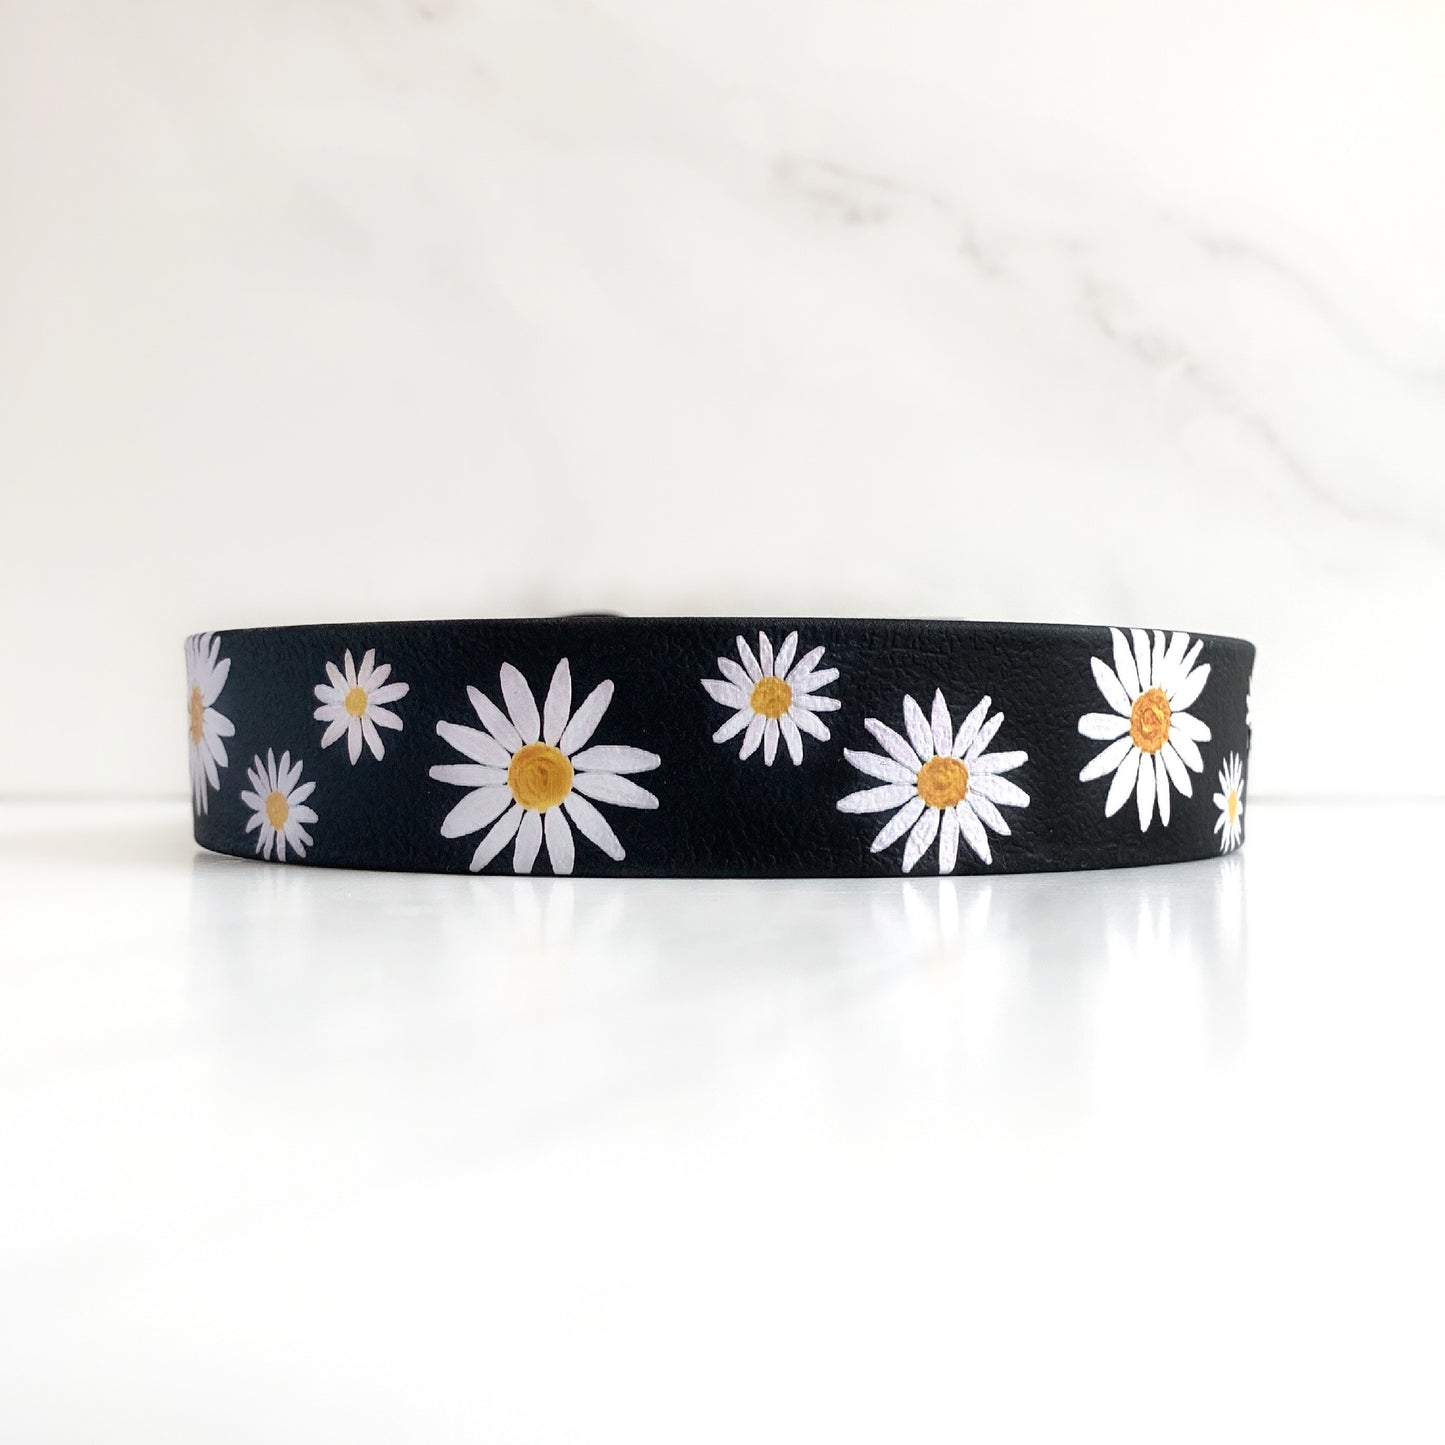 Daisies on Black | Ready To Ship